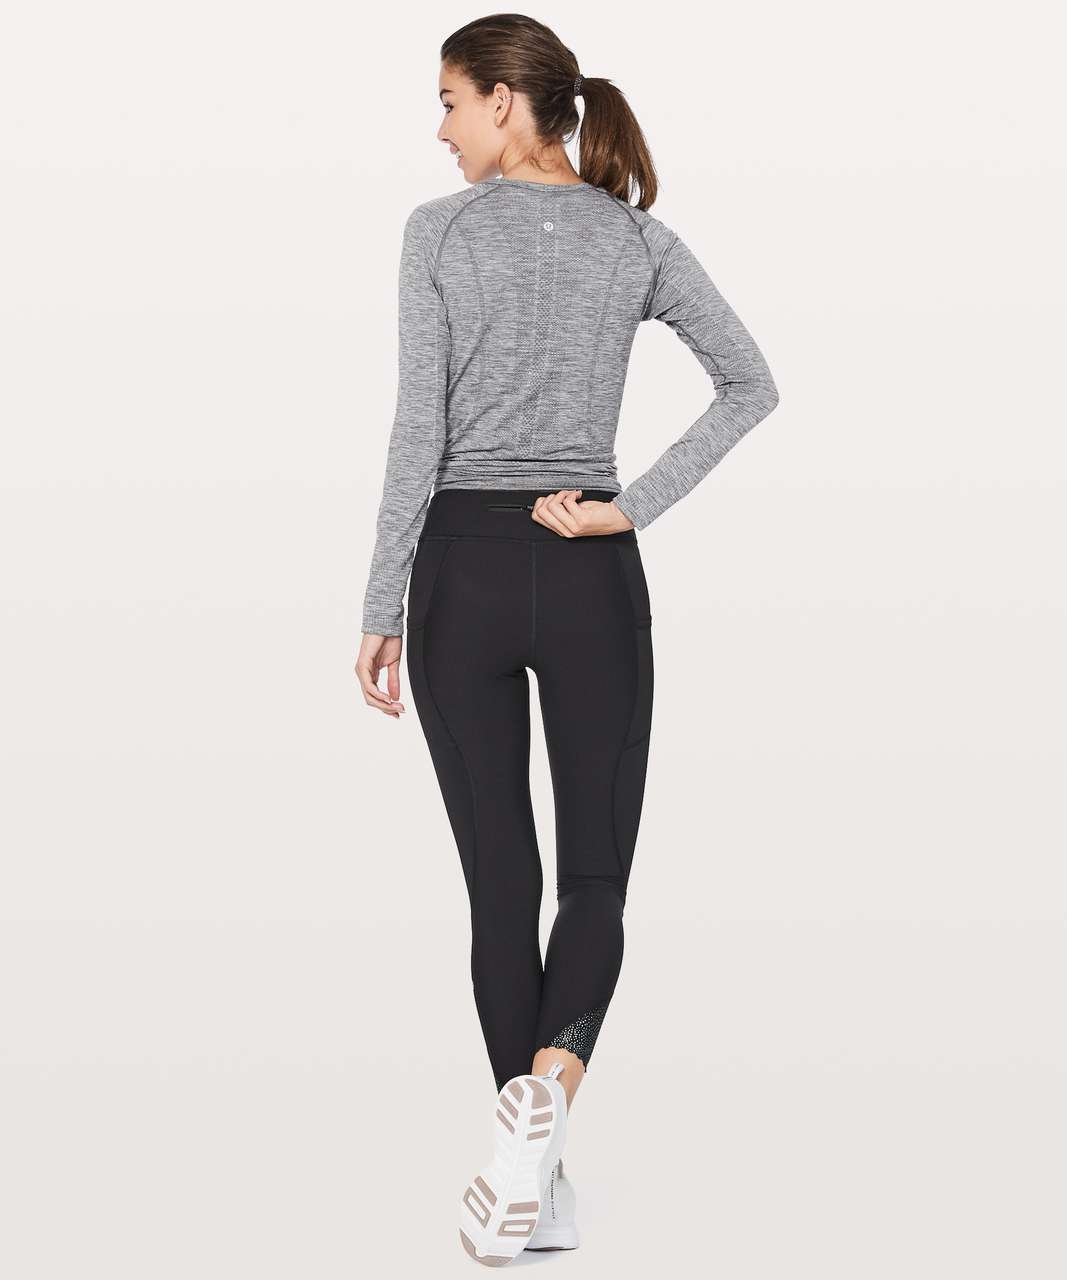 NWOT - !!!SOLD OUT!!! Lululemon Tight Stuff Tight II *25 Black | SIZE: 4,  6, 10 